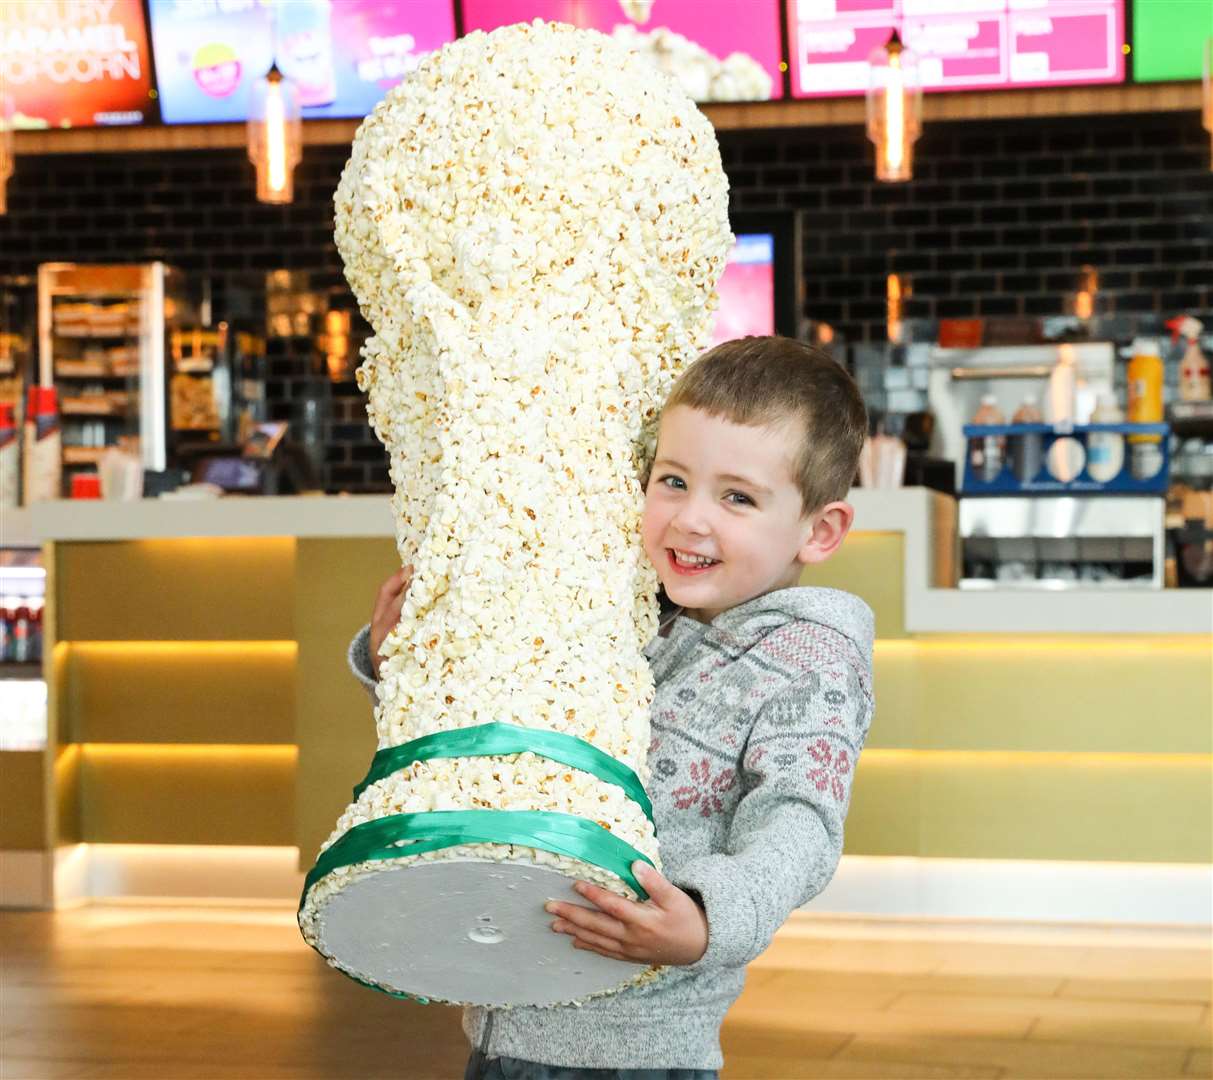 A giant popcorn trophy will be at Bluewater to celebrate the 2018 World Cup